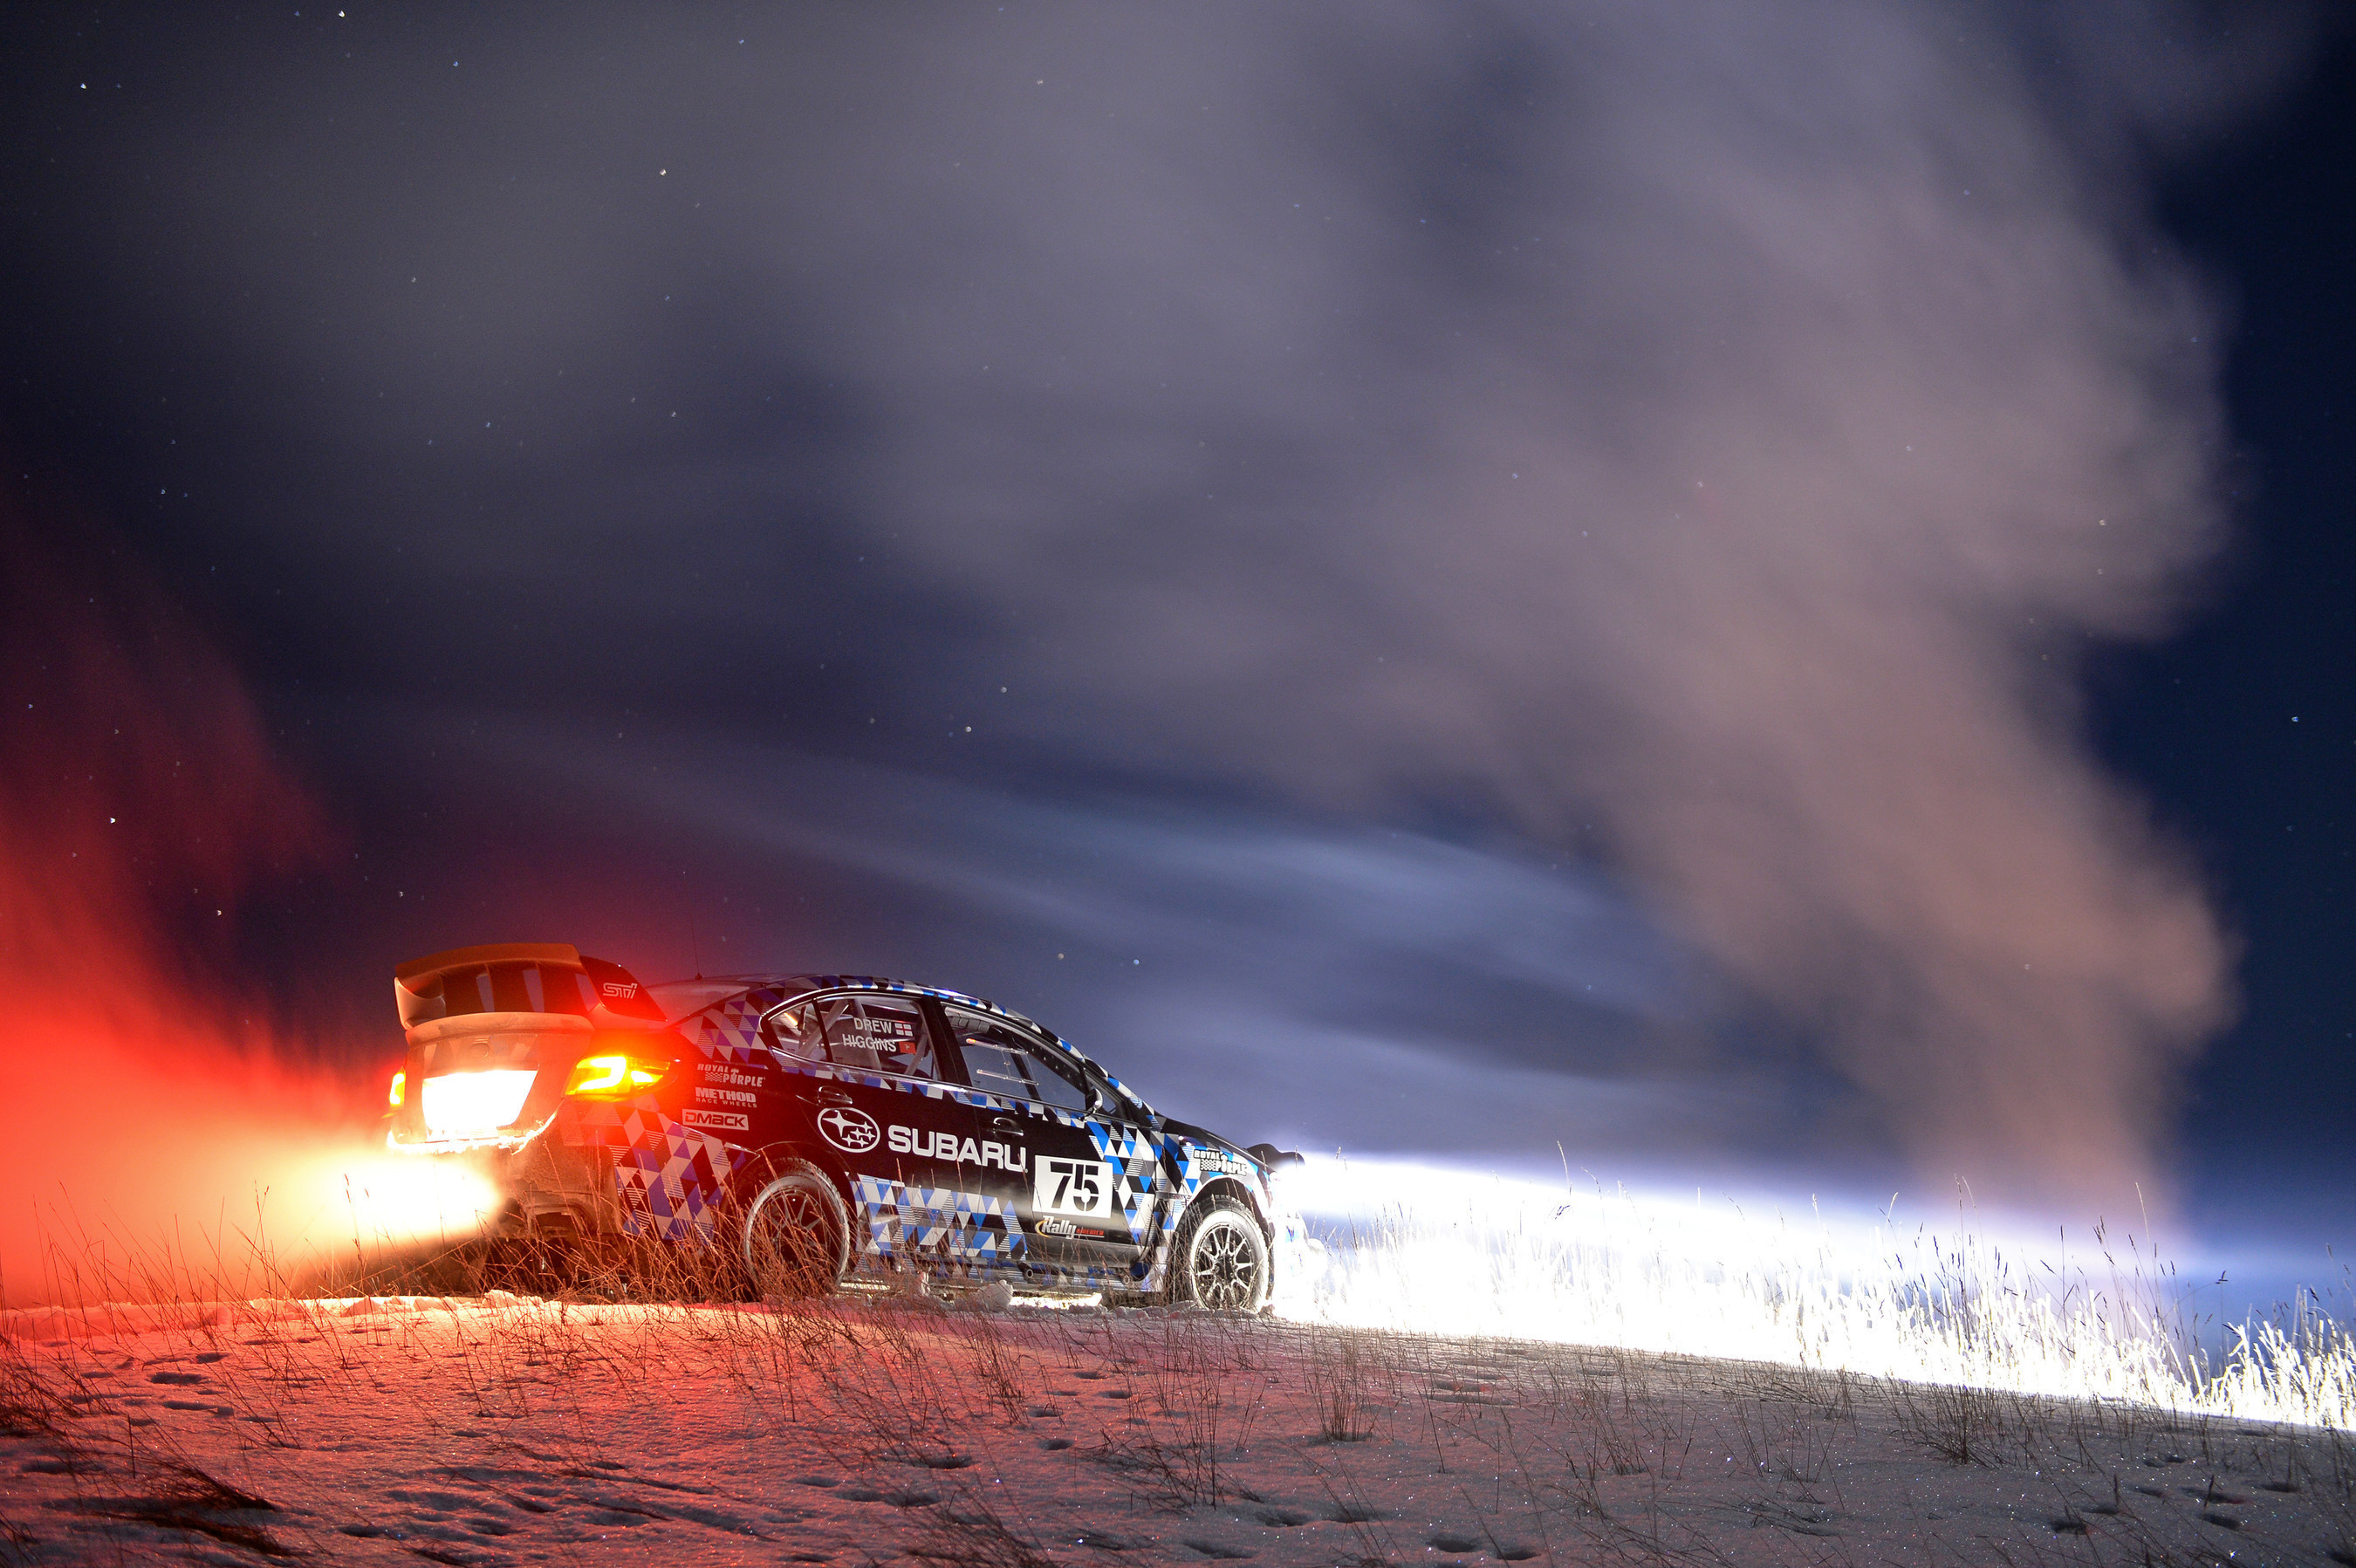 Subaru Rally Team USA debuts the highly anticipated 2015 WRX STI rally car at Sno*Drift Rally, the first round of the Rally America Championship.